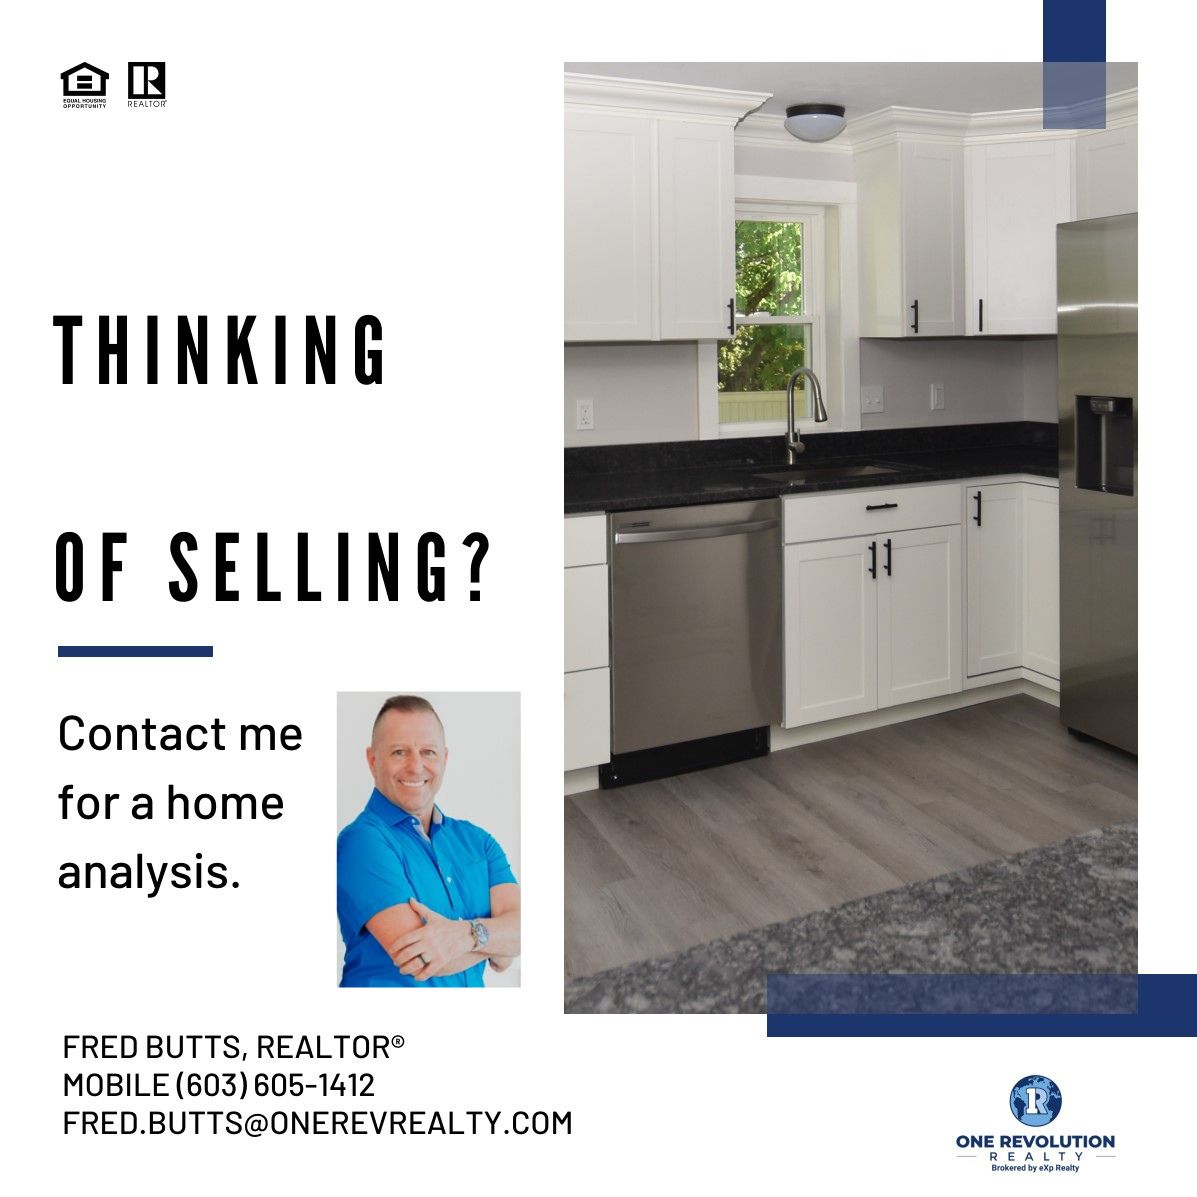 THINKING OF SELLING? Contact me for a free home analysis 🏡

#thinkingofselling #listwithme #homeanalysis #freevaluation #onerevolutionrealty #newhampshirerealestate #mainerealestate #realestate #realtor #realestateagent #listingagent #buyersagent #exprealty #wecanhelp